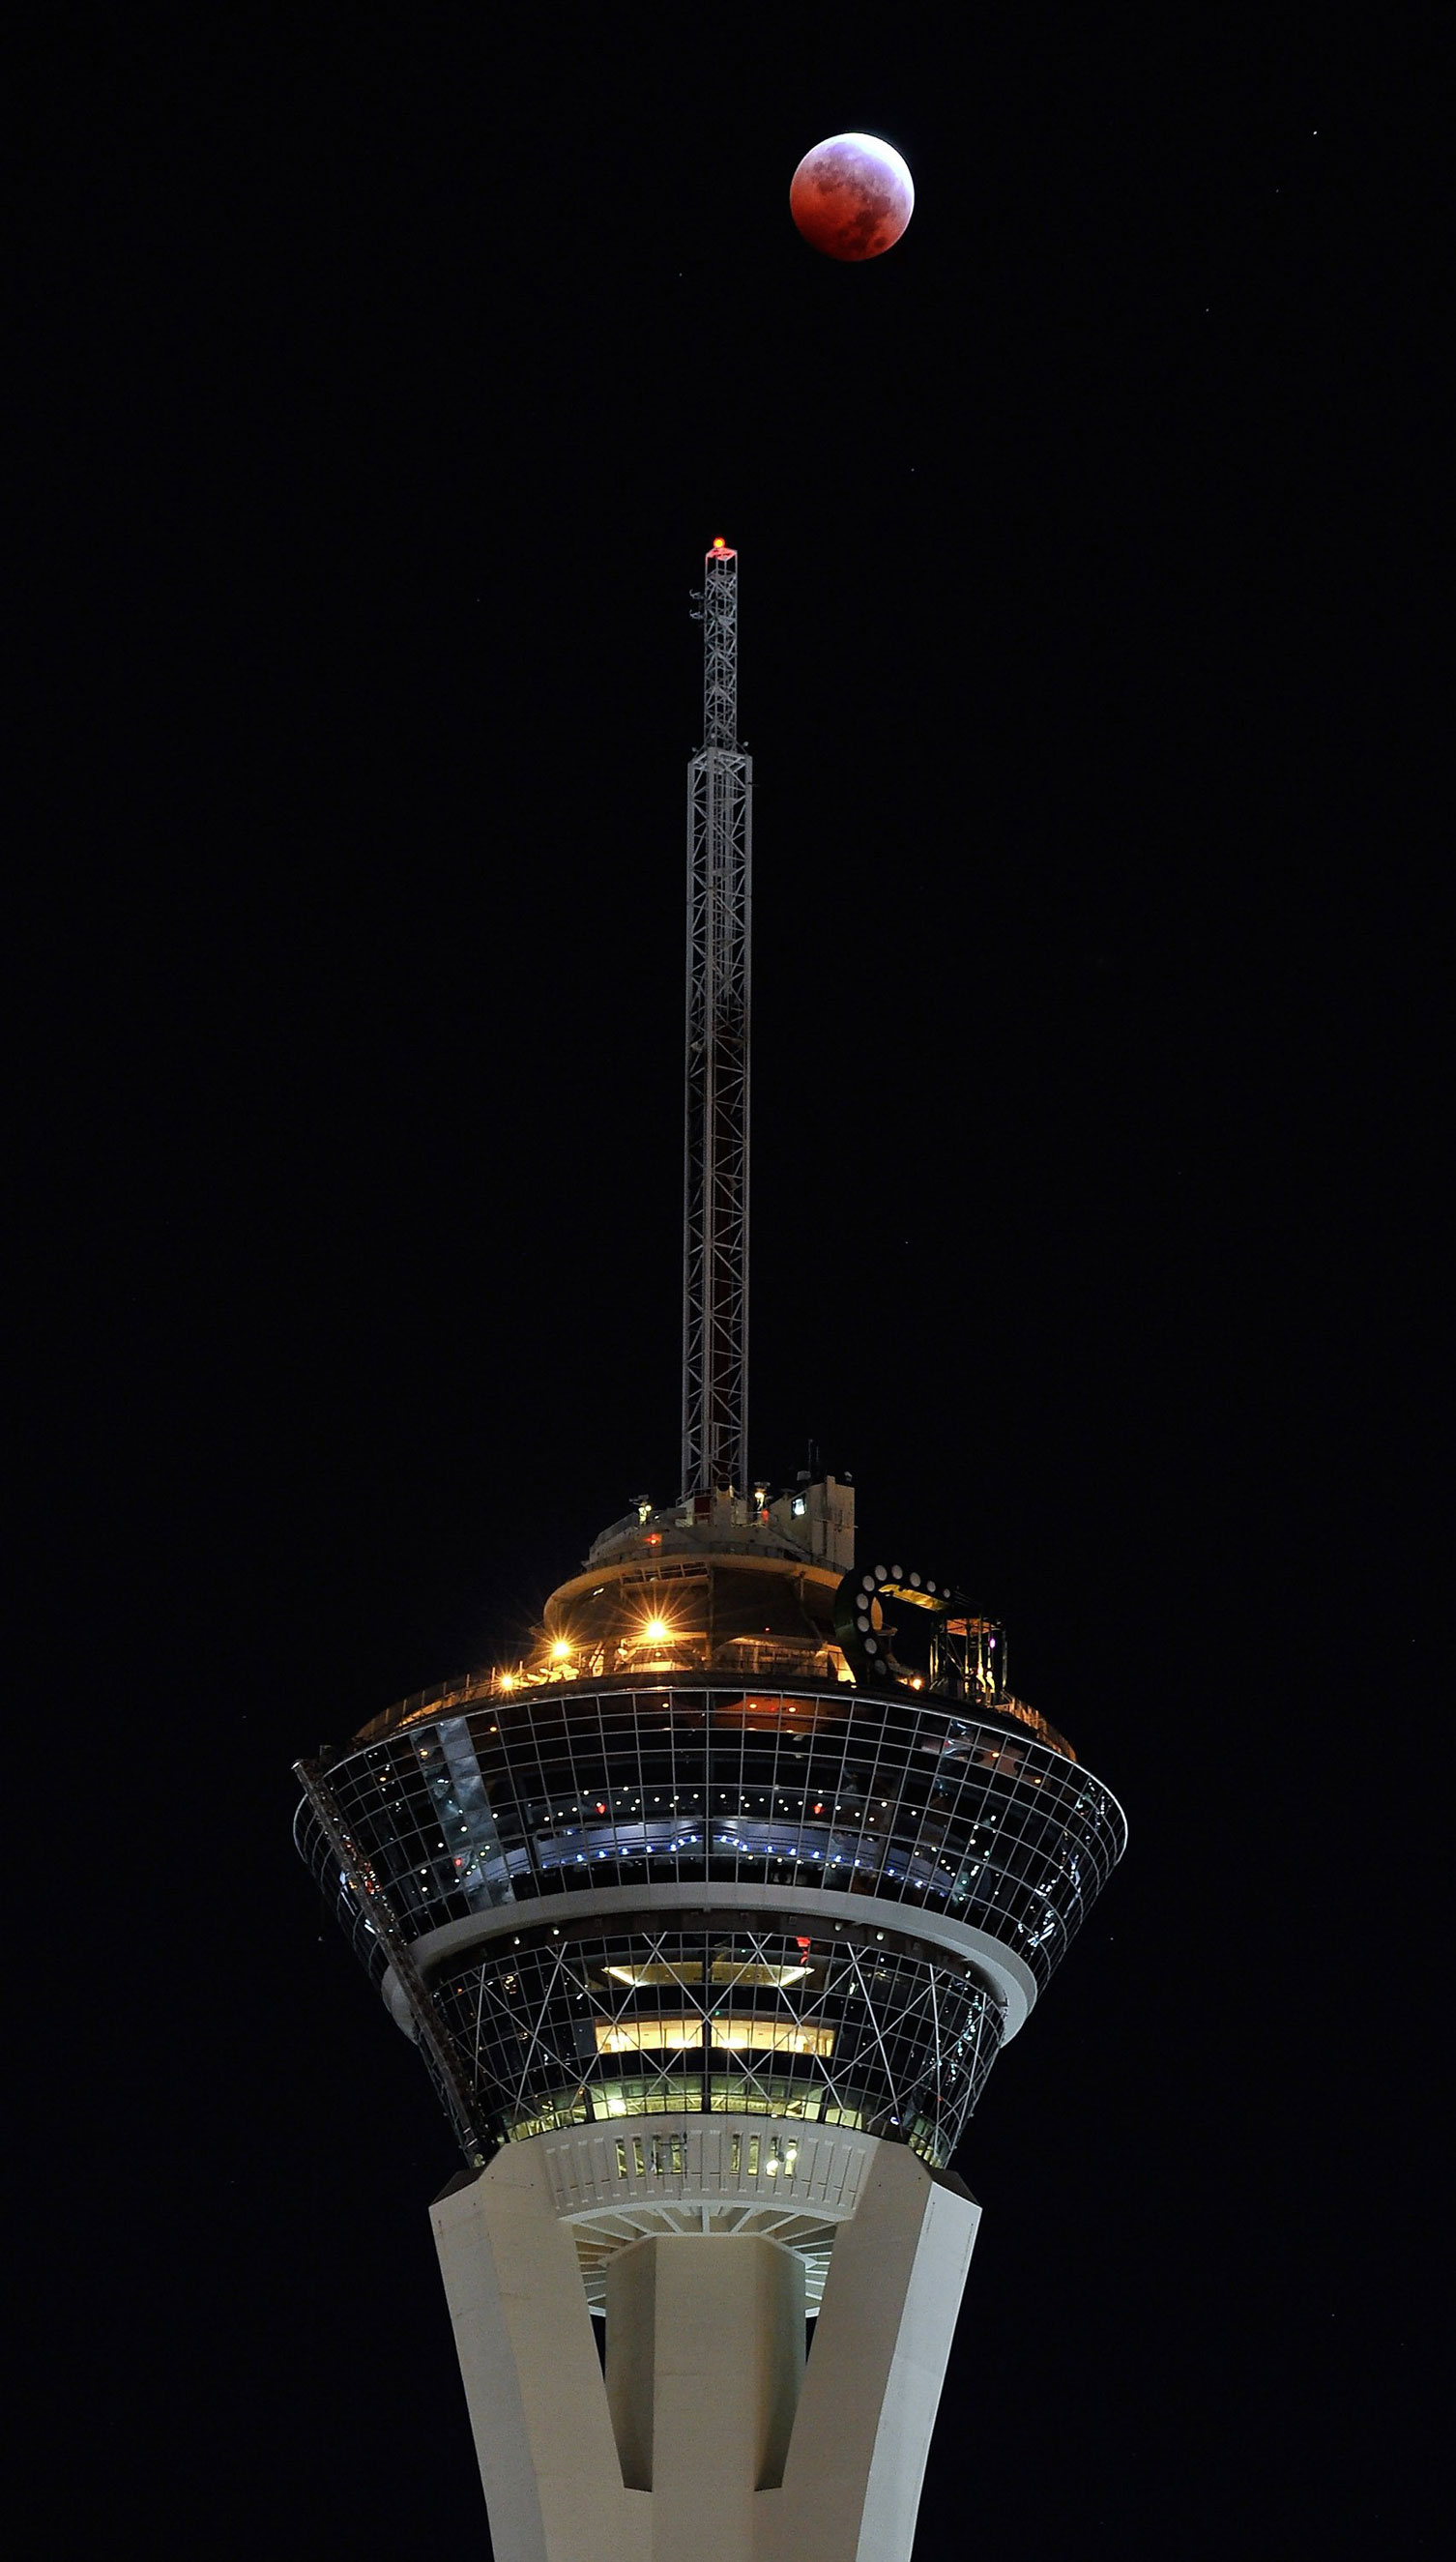 The moon during a total lunar eclipse above the Stratosphere Tower in Las Vegas on Oct. 8, 2014.